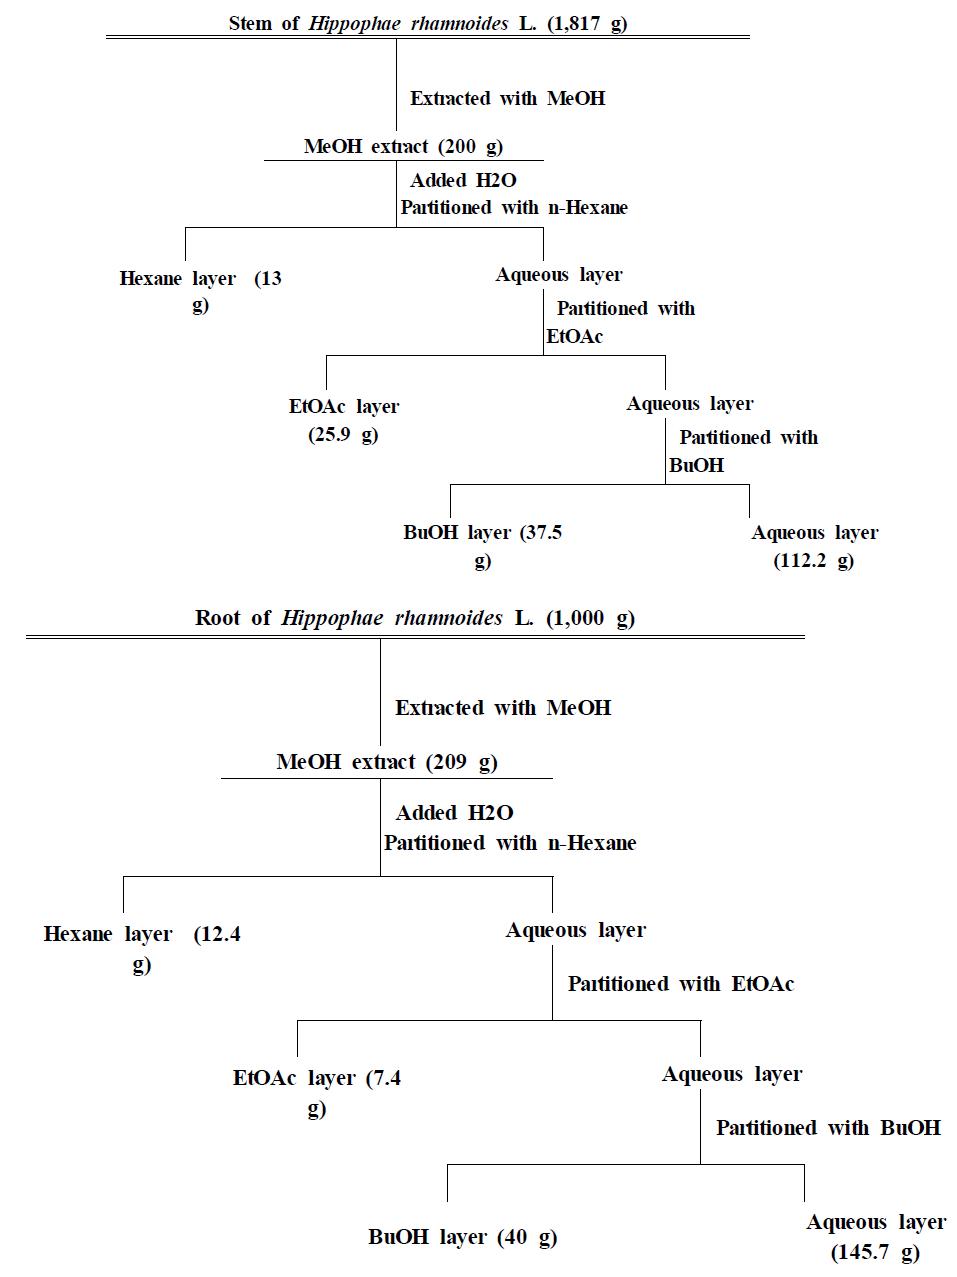 Scheme of solvent fraction procedure from the Stem and Root of Hippophae rhamnoides L.